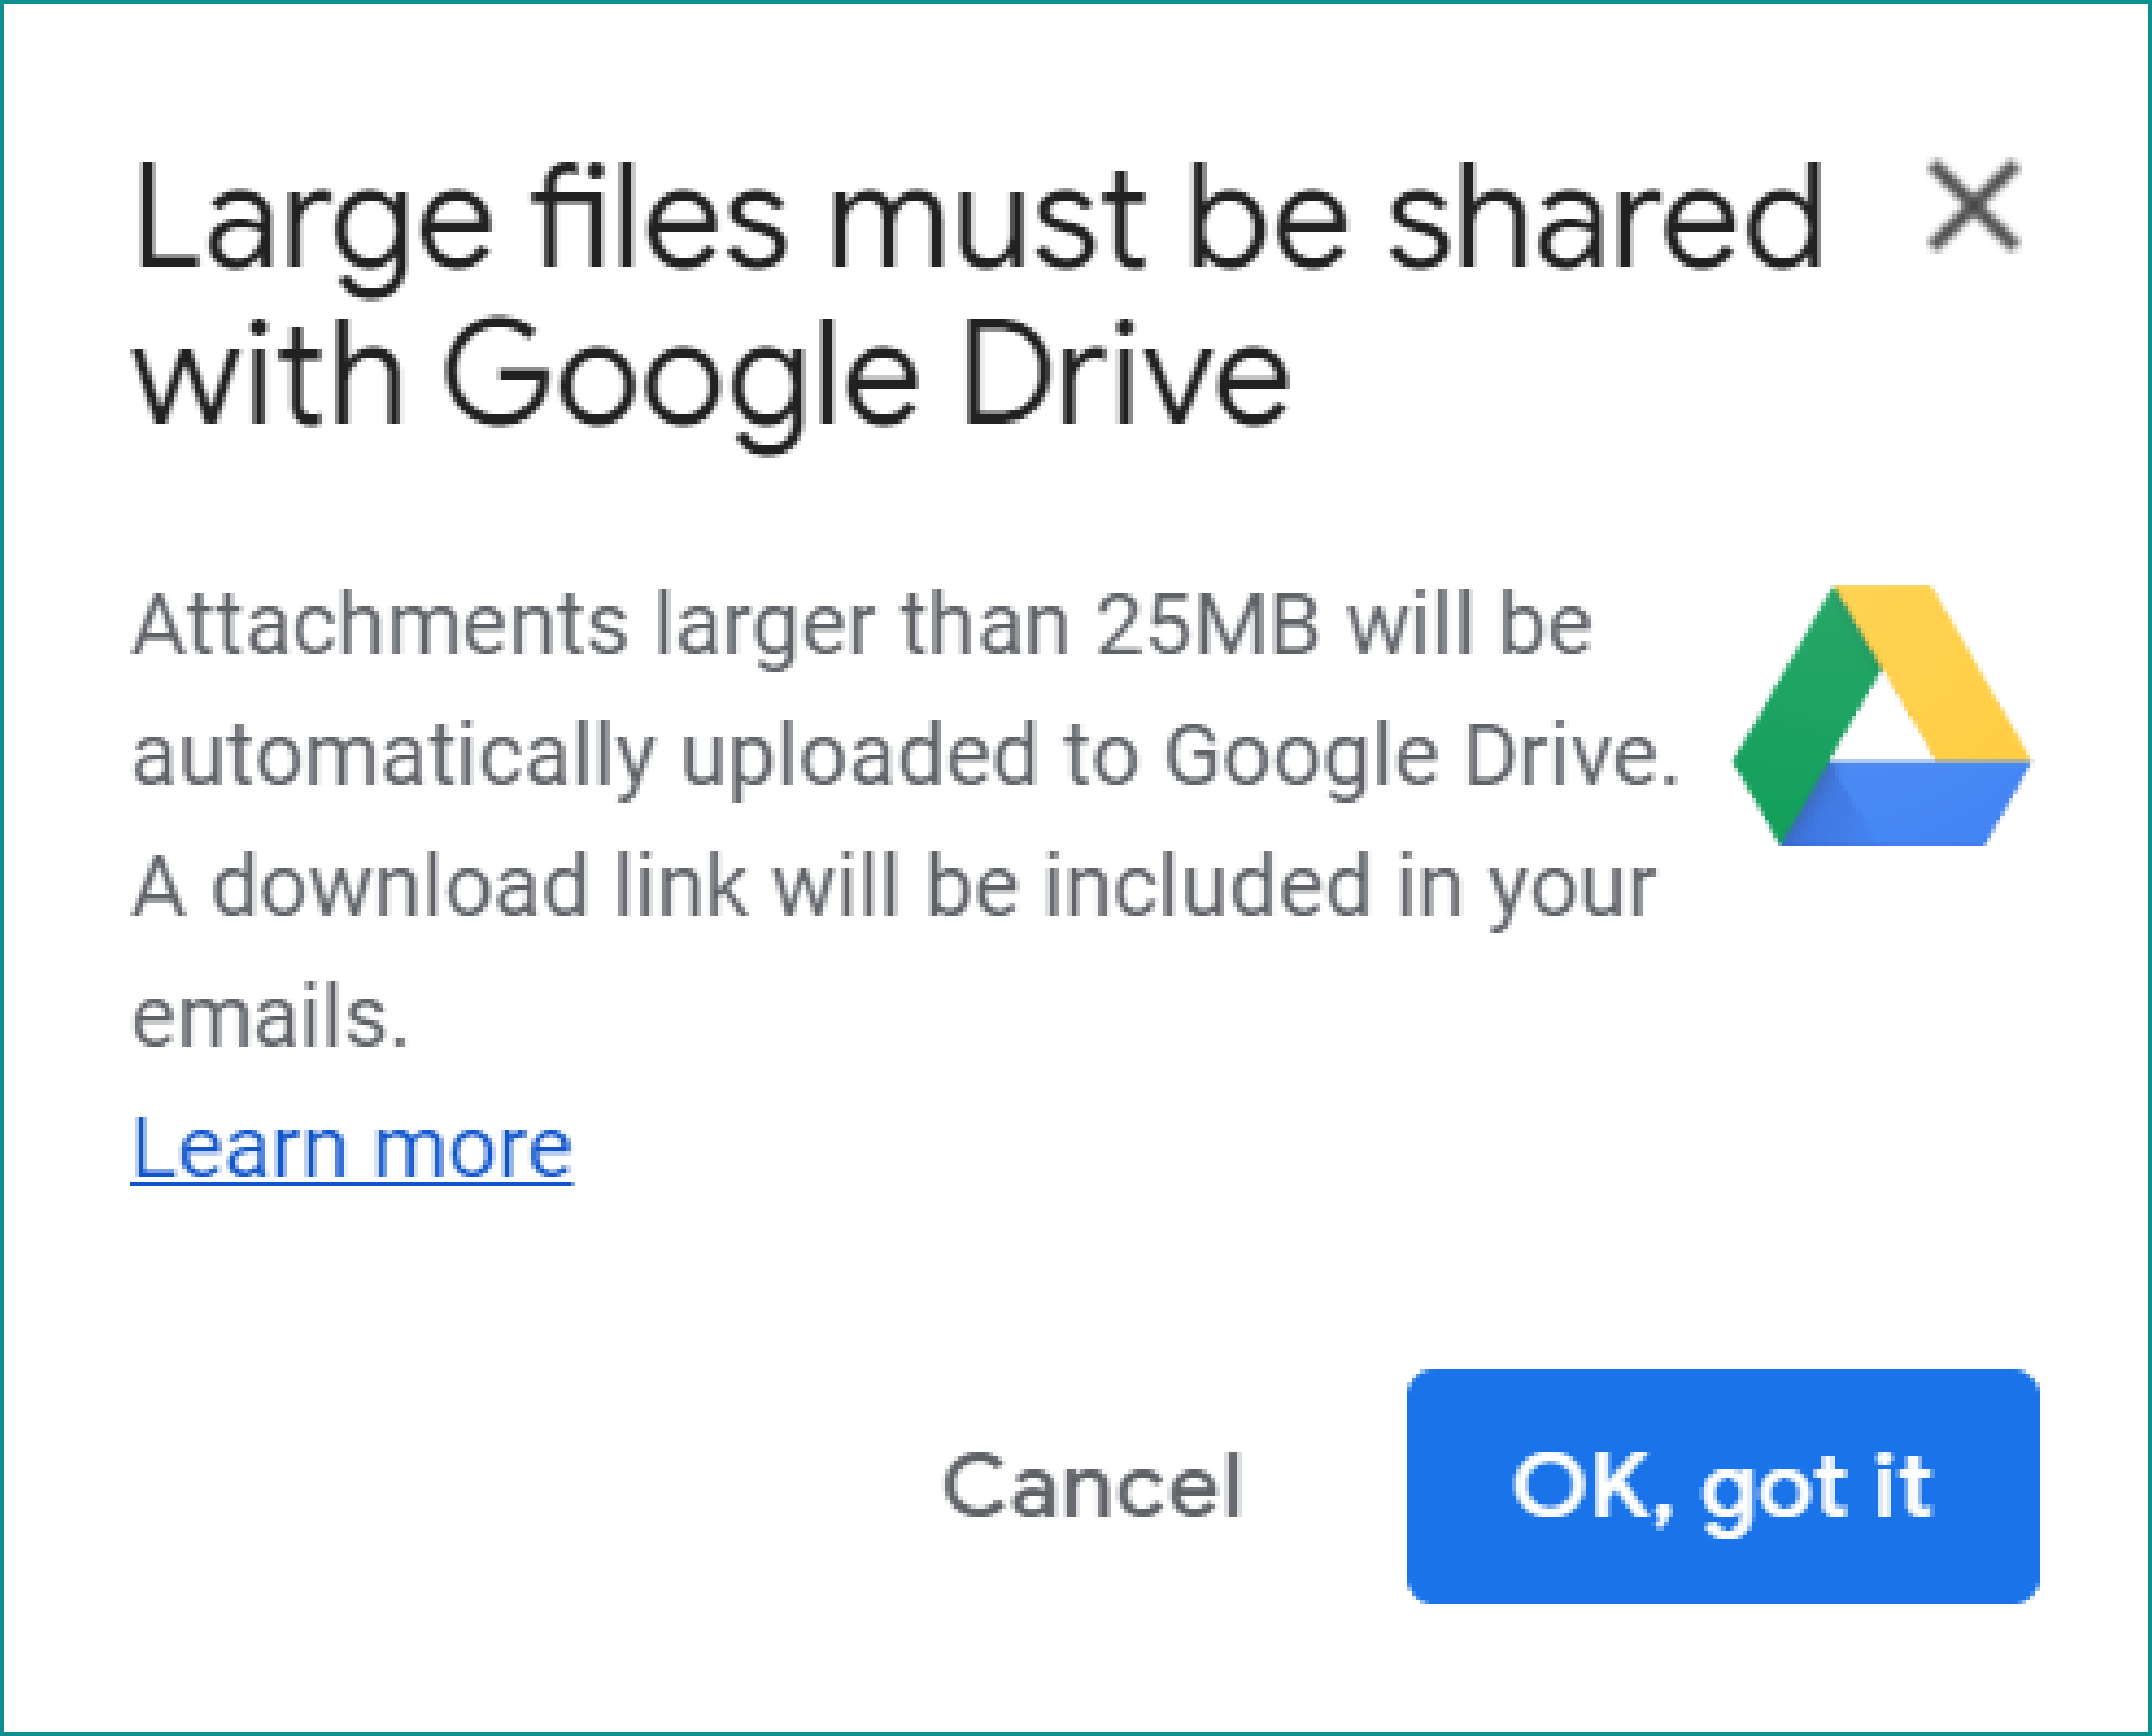 larges-files-google-drive